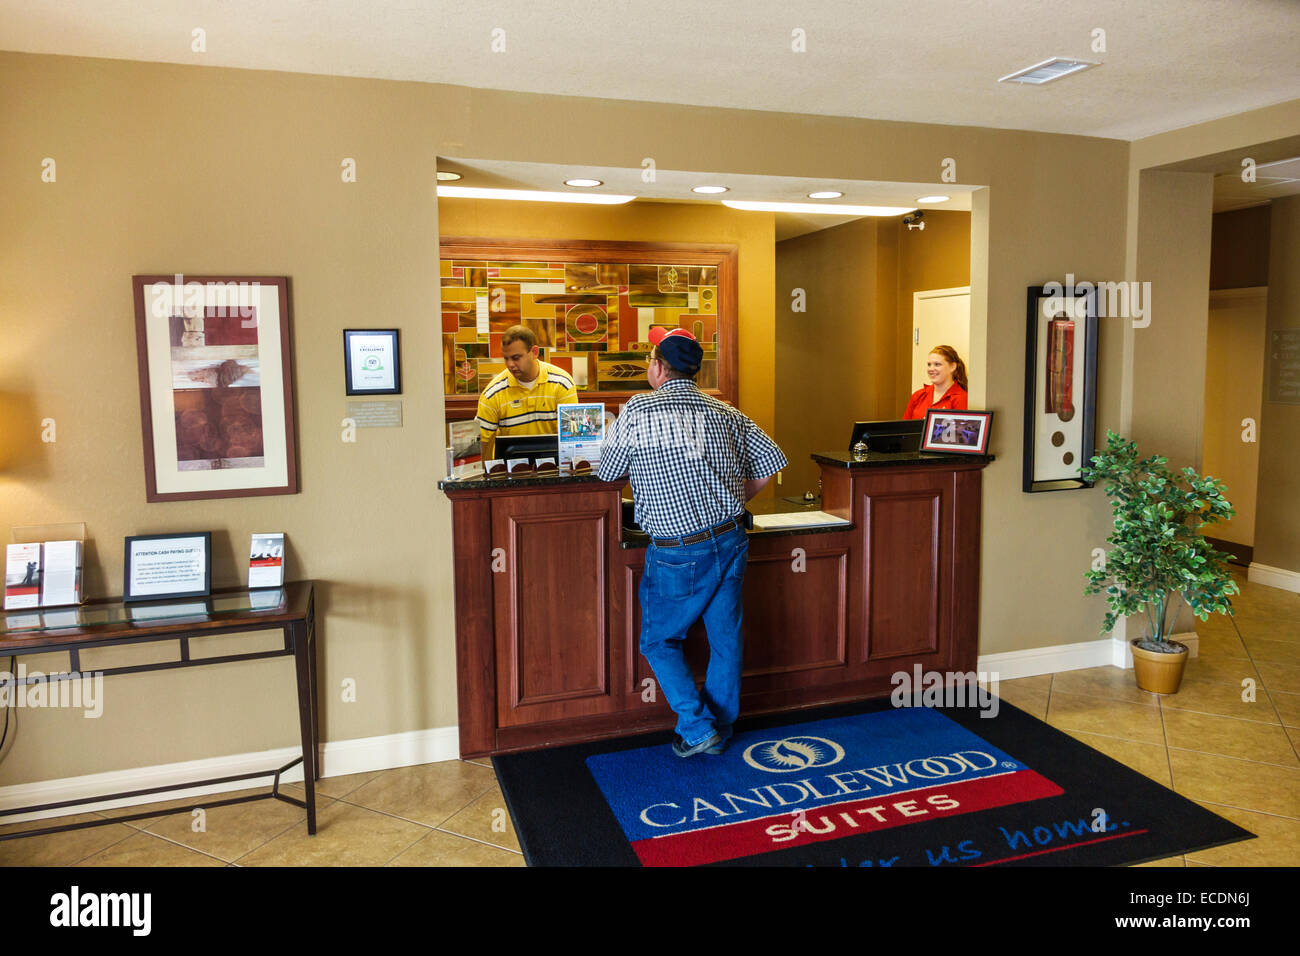 Springfield Illinois,Candlewood Suites,motel,hotel hotels lodging inn motel motels,lobby,front desk check in reception reservation reservations regist Stock Photo